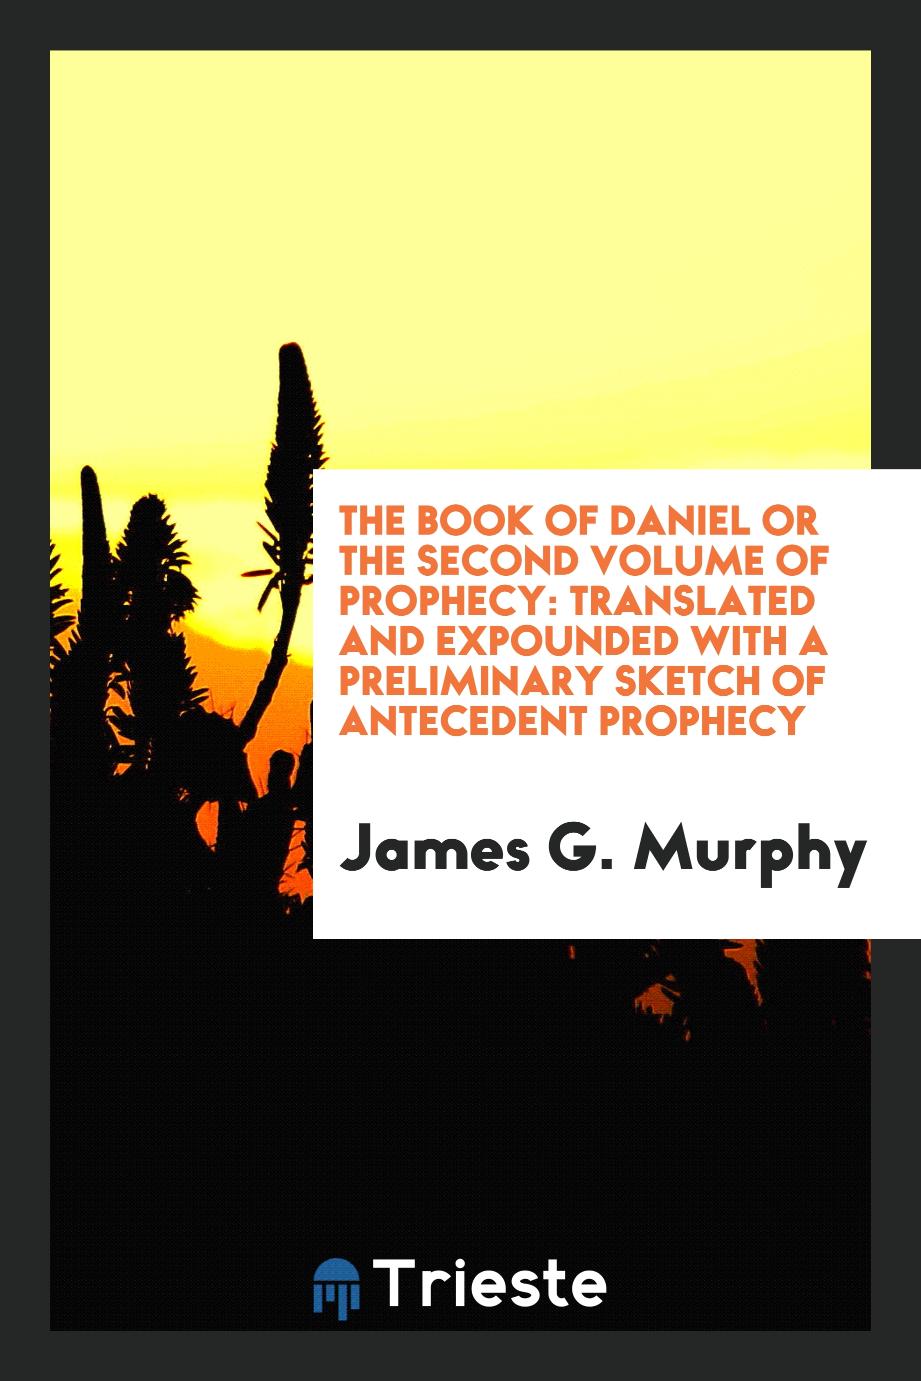 The Book of Daniel or the Second Volume of Prophecy: Translated and Expounded with a Preliminary Sketch of Antecedent Prophecy